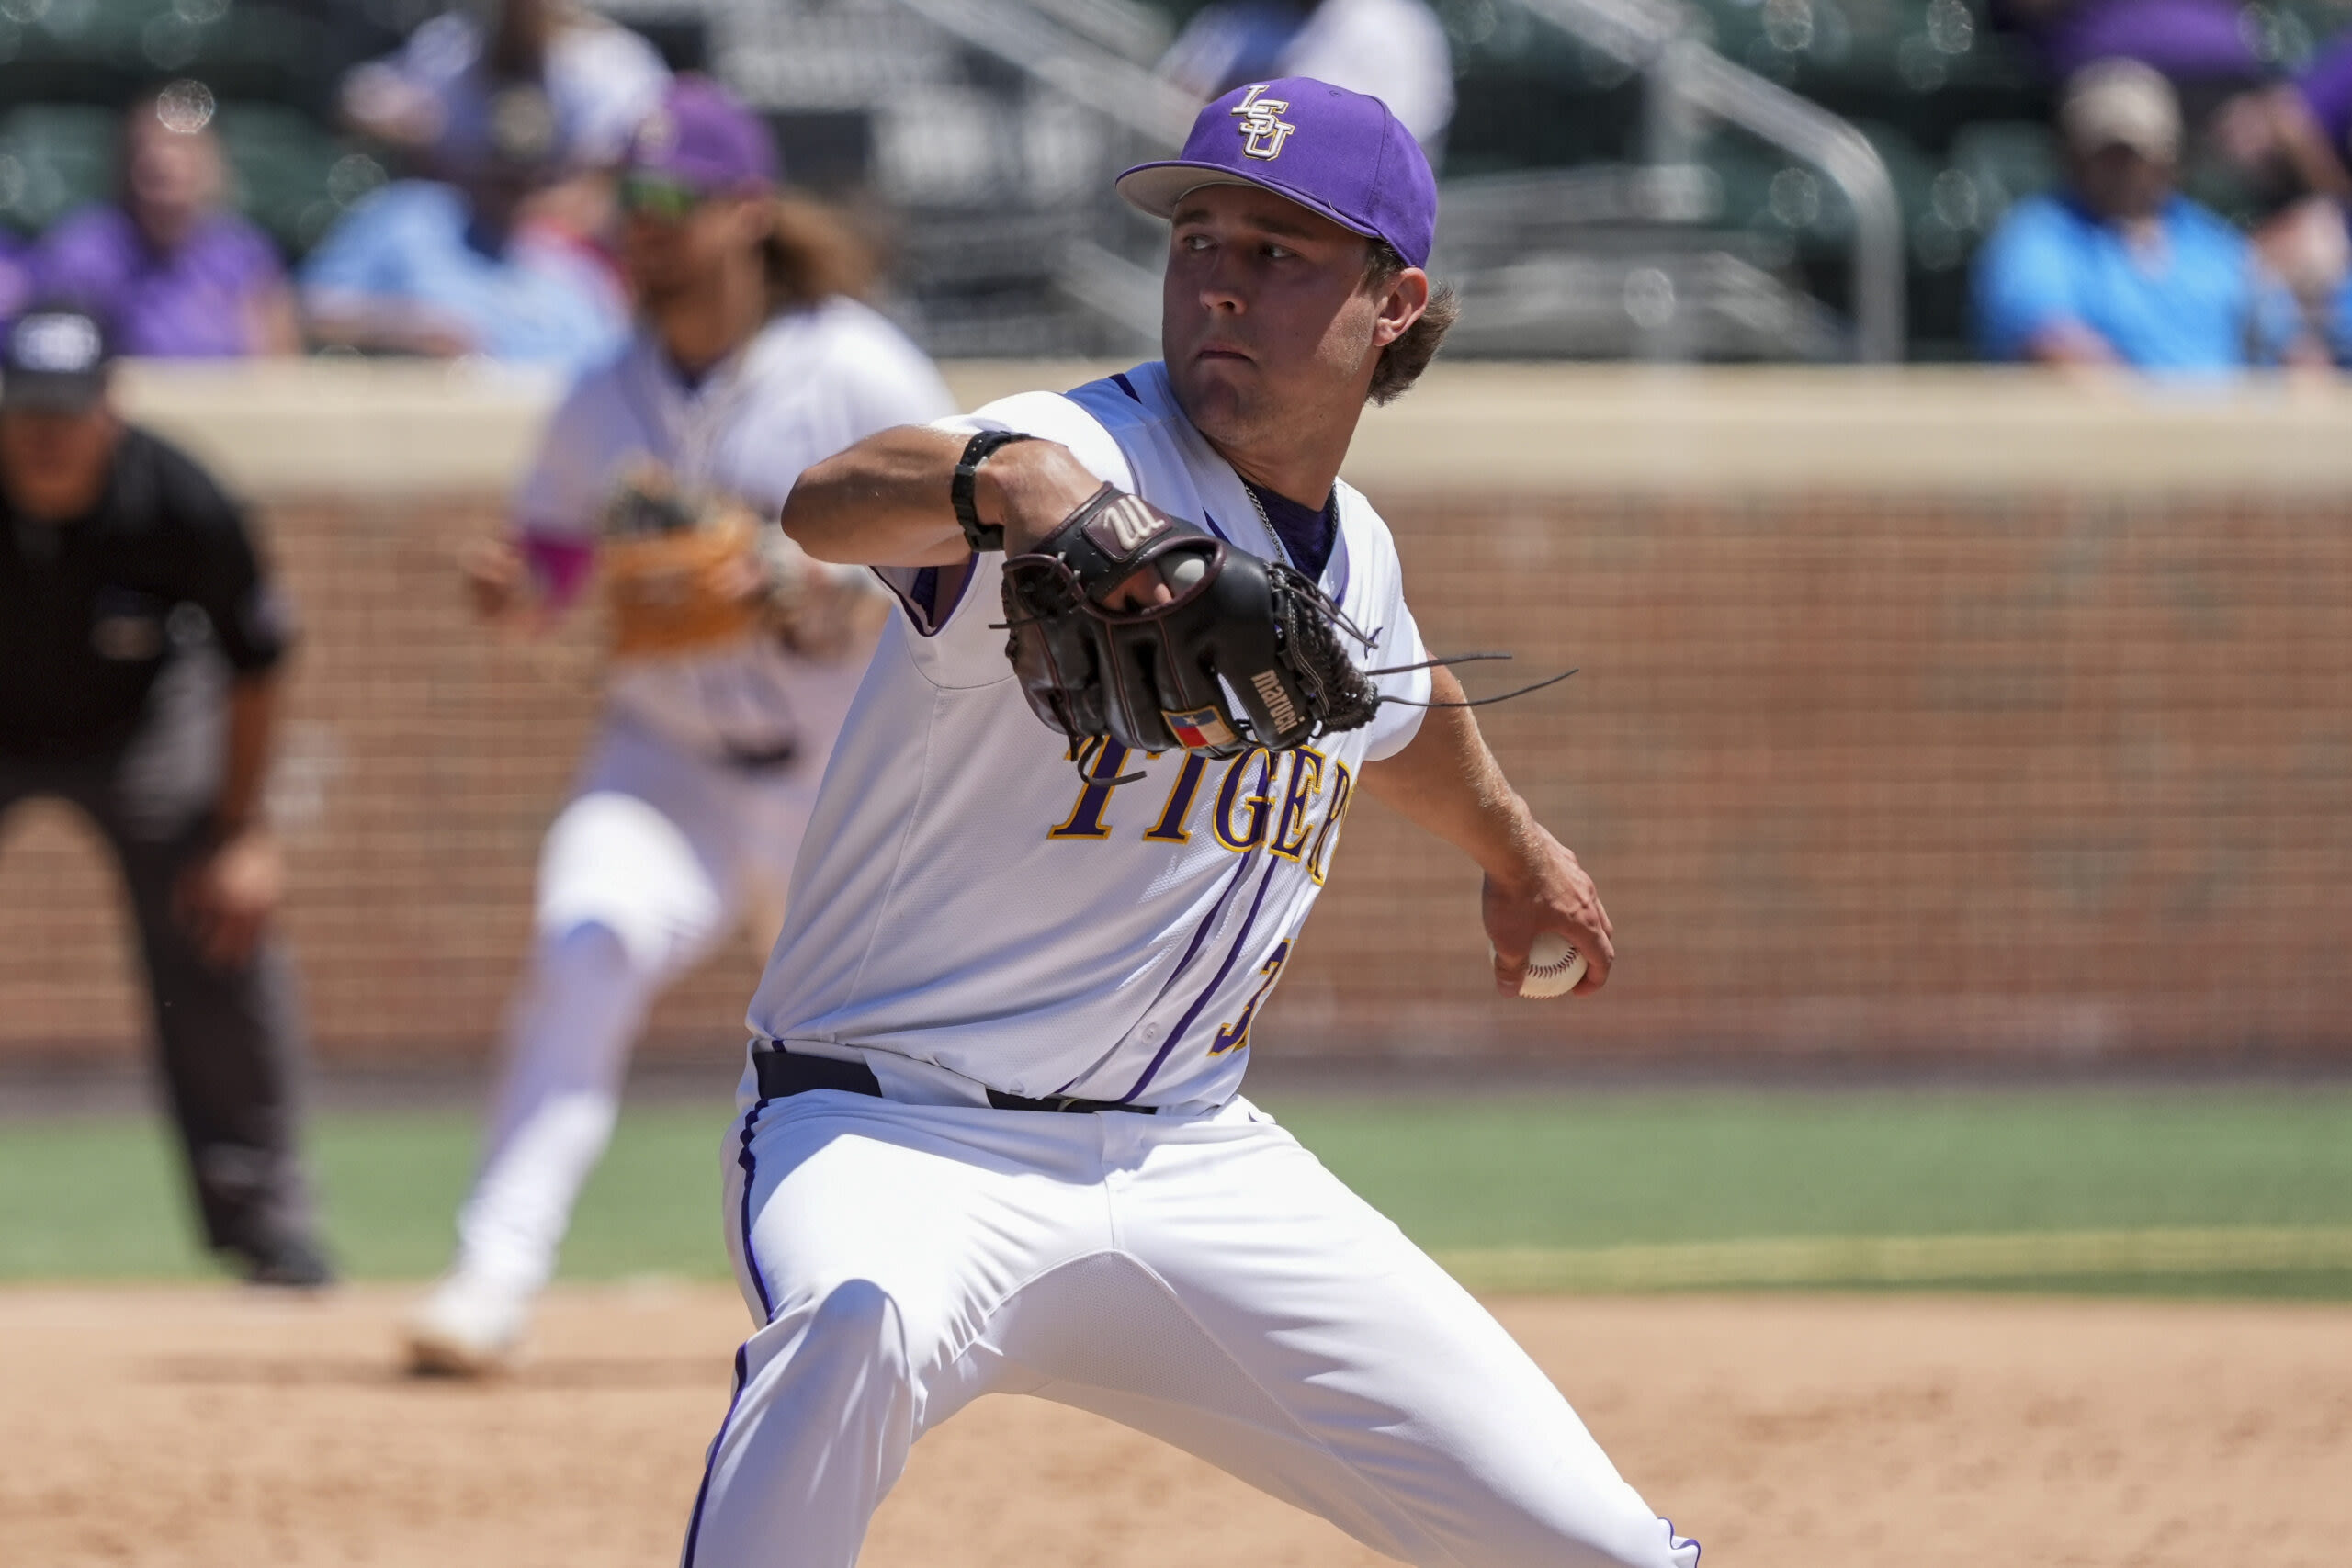 Top LSU bullpen option Griffin Herring drafted by Yankees in 6th round